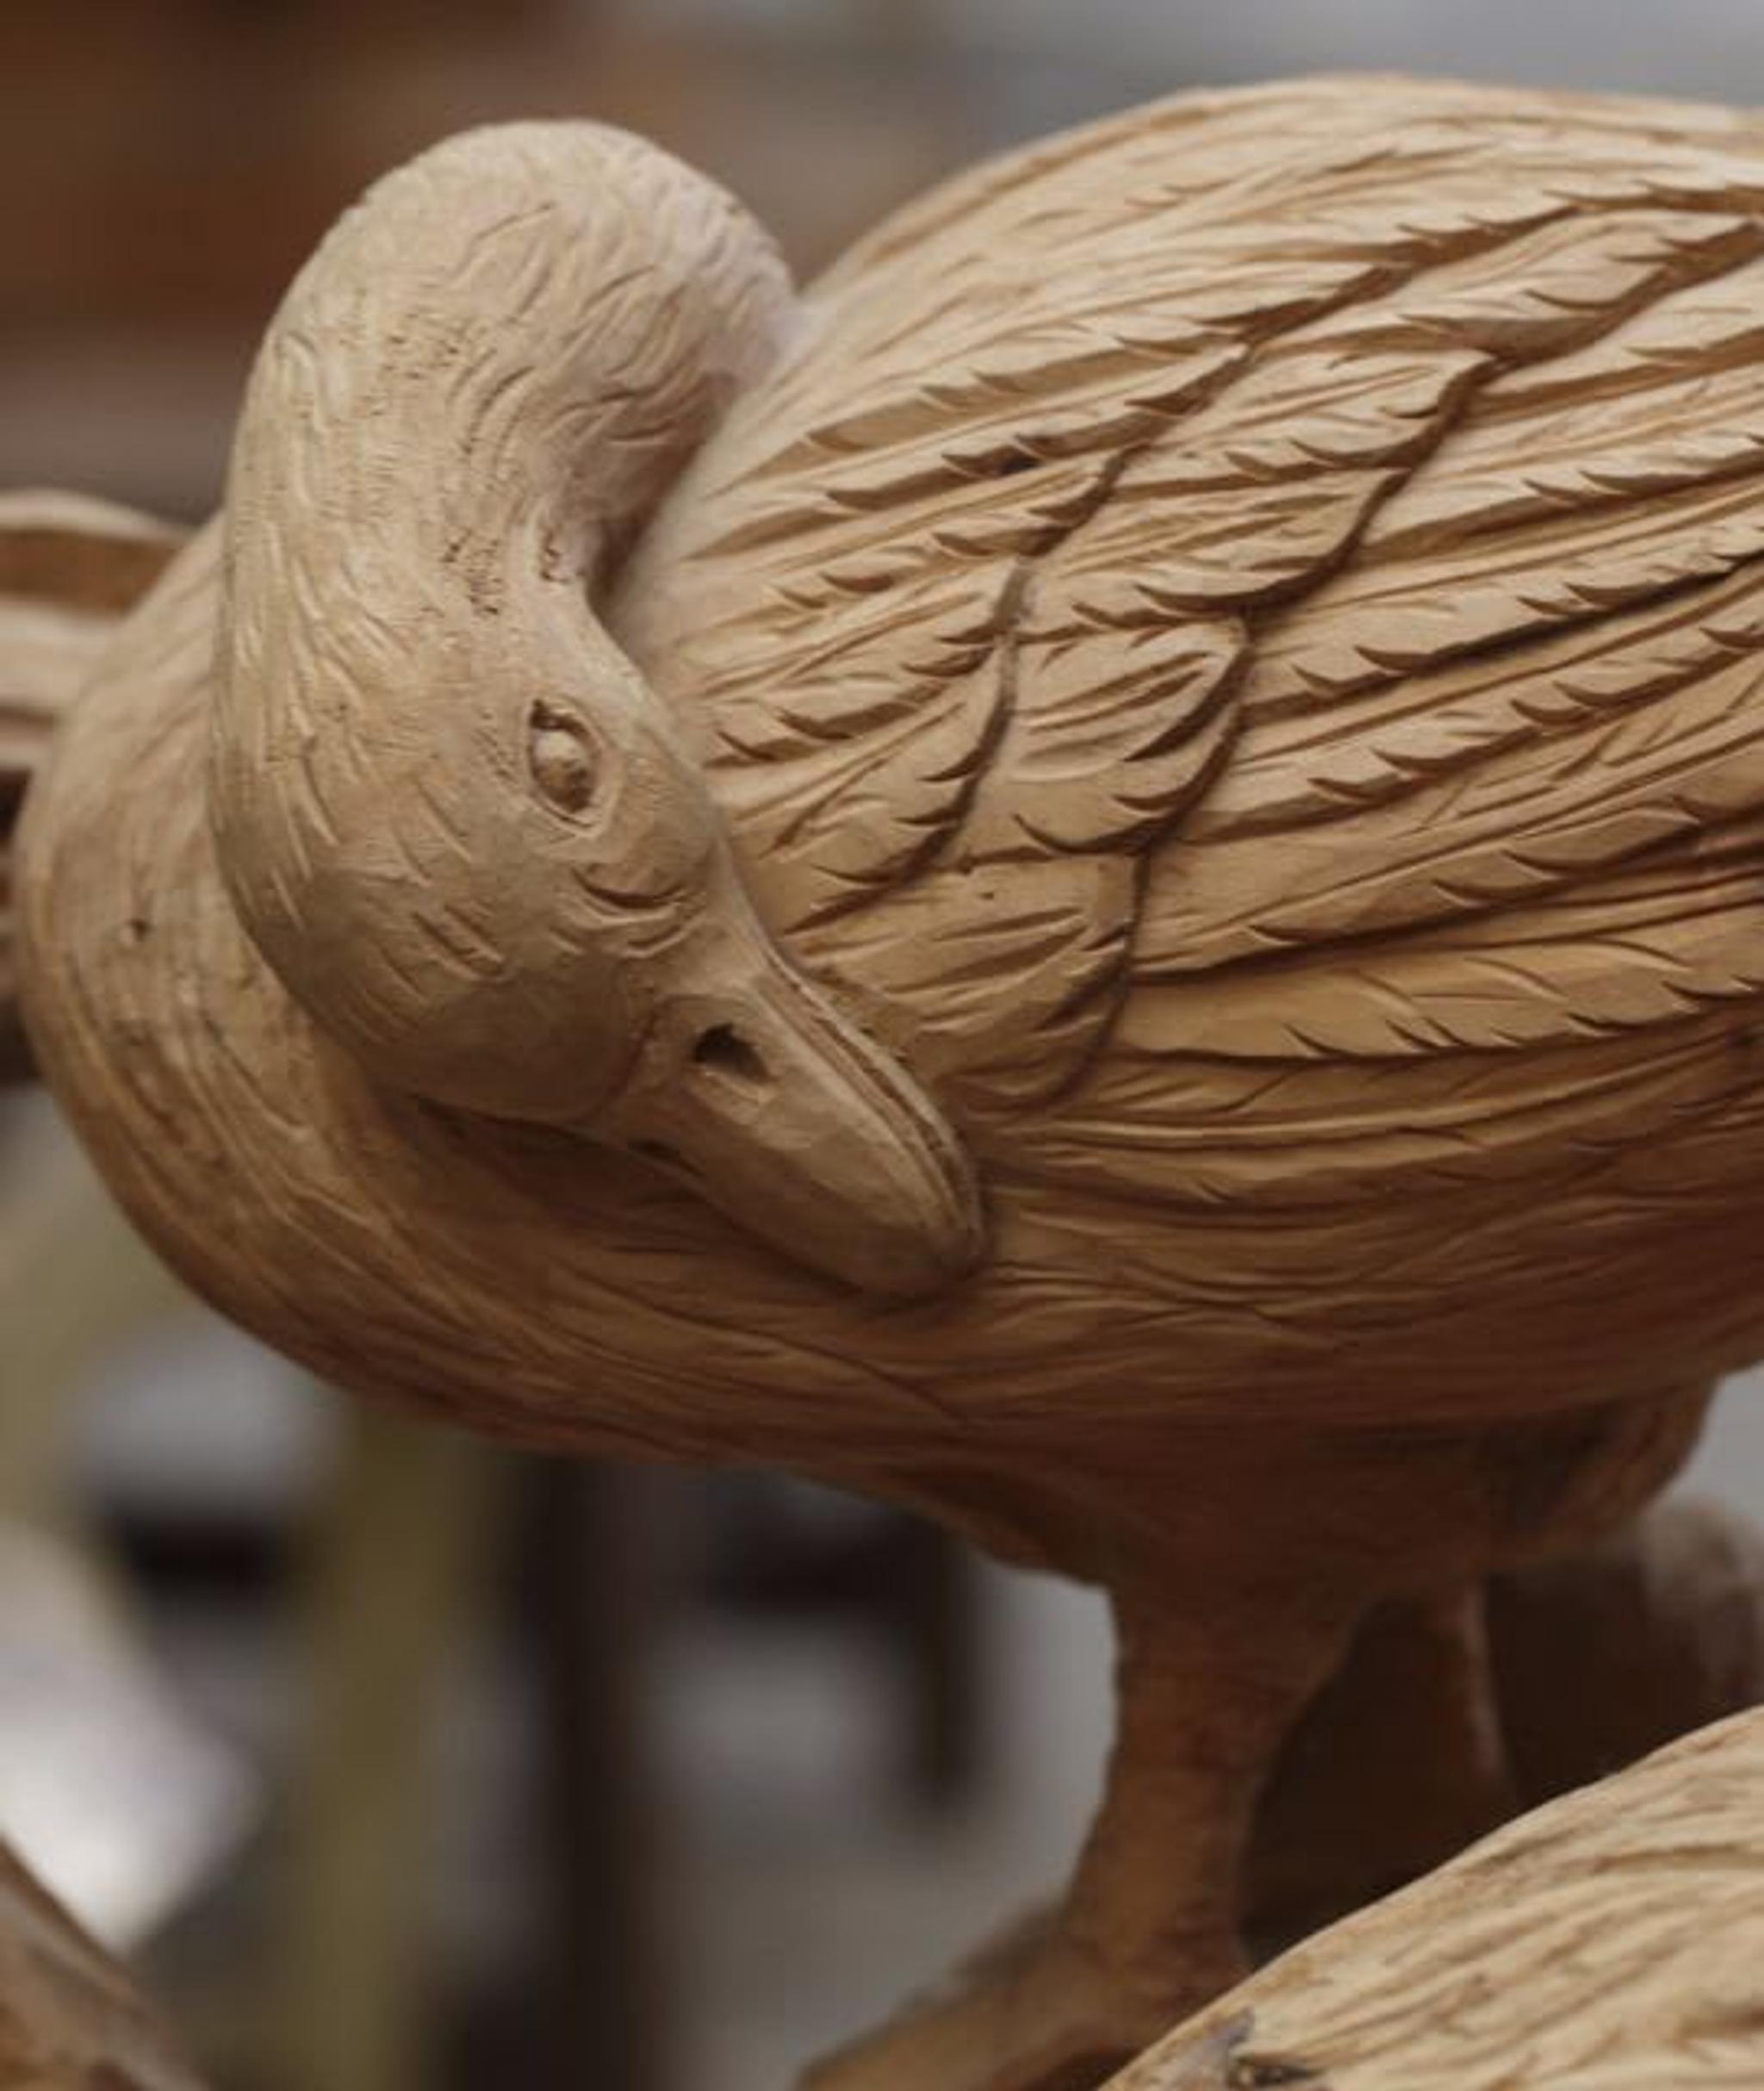 Exquisite detail of Gioco di Uccelli wood sculpture.